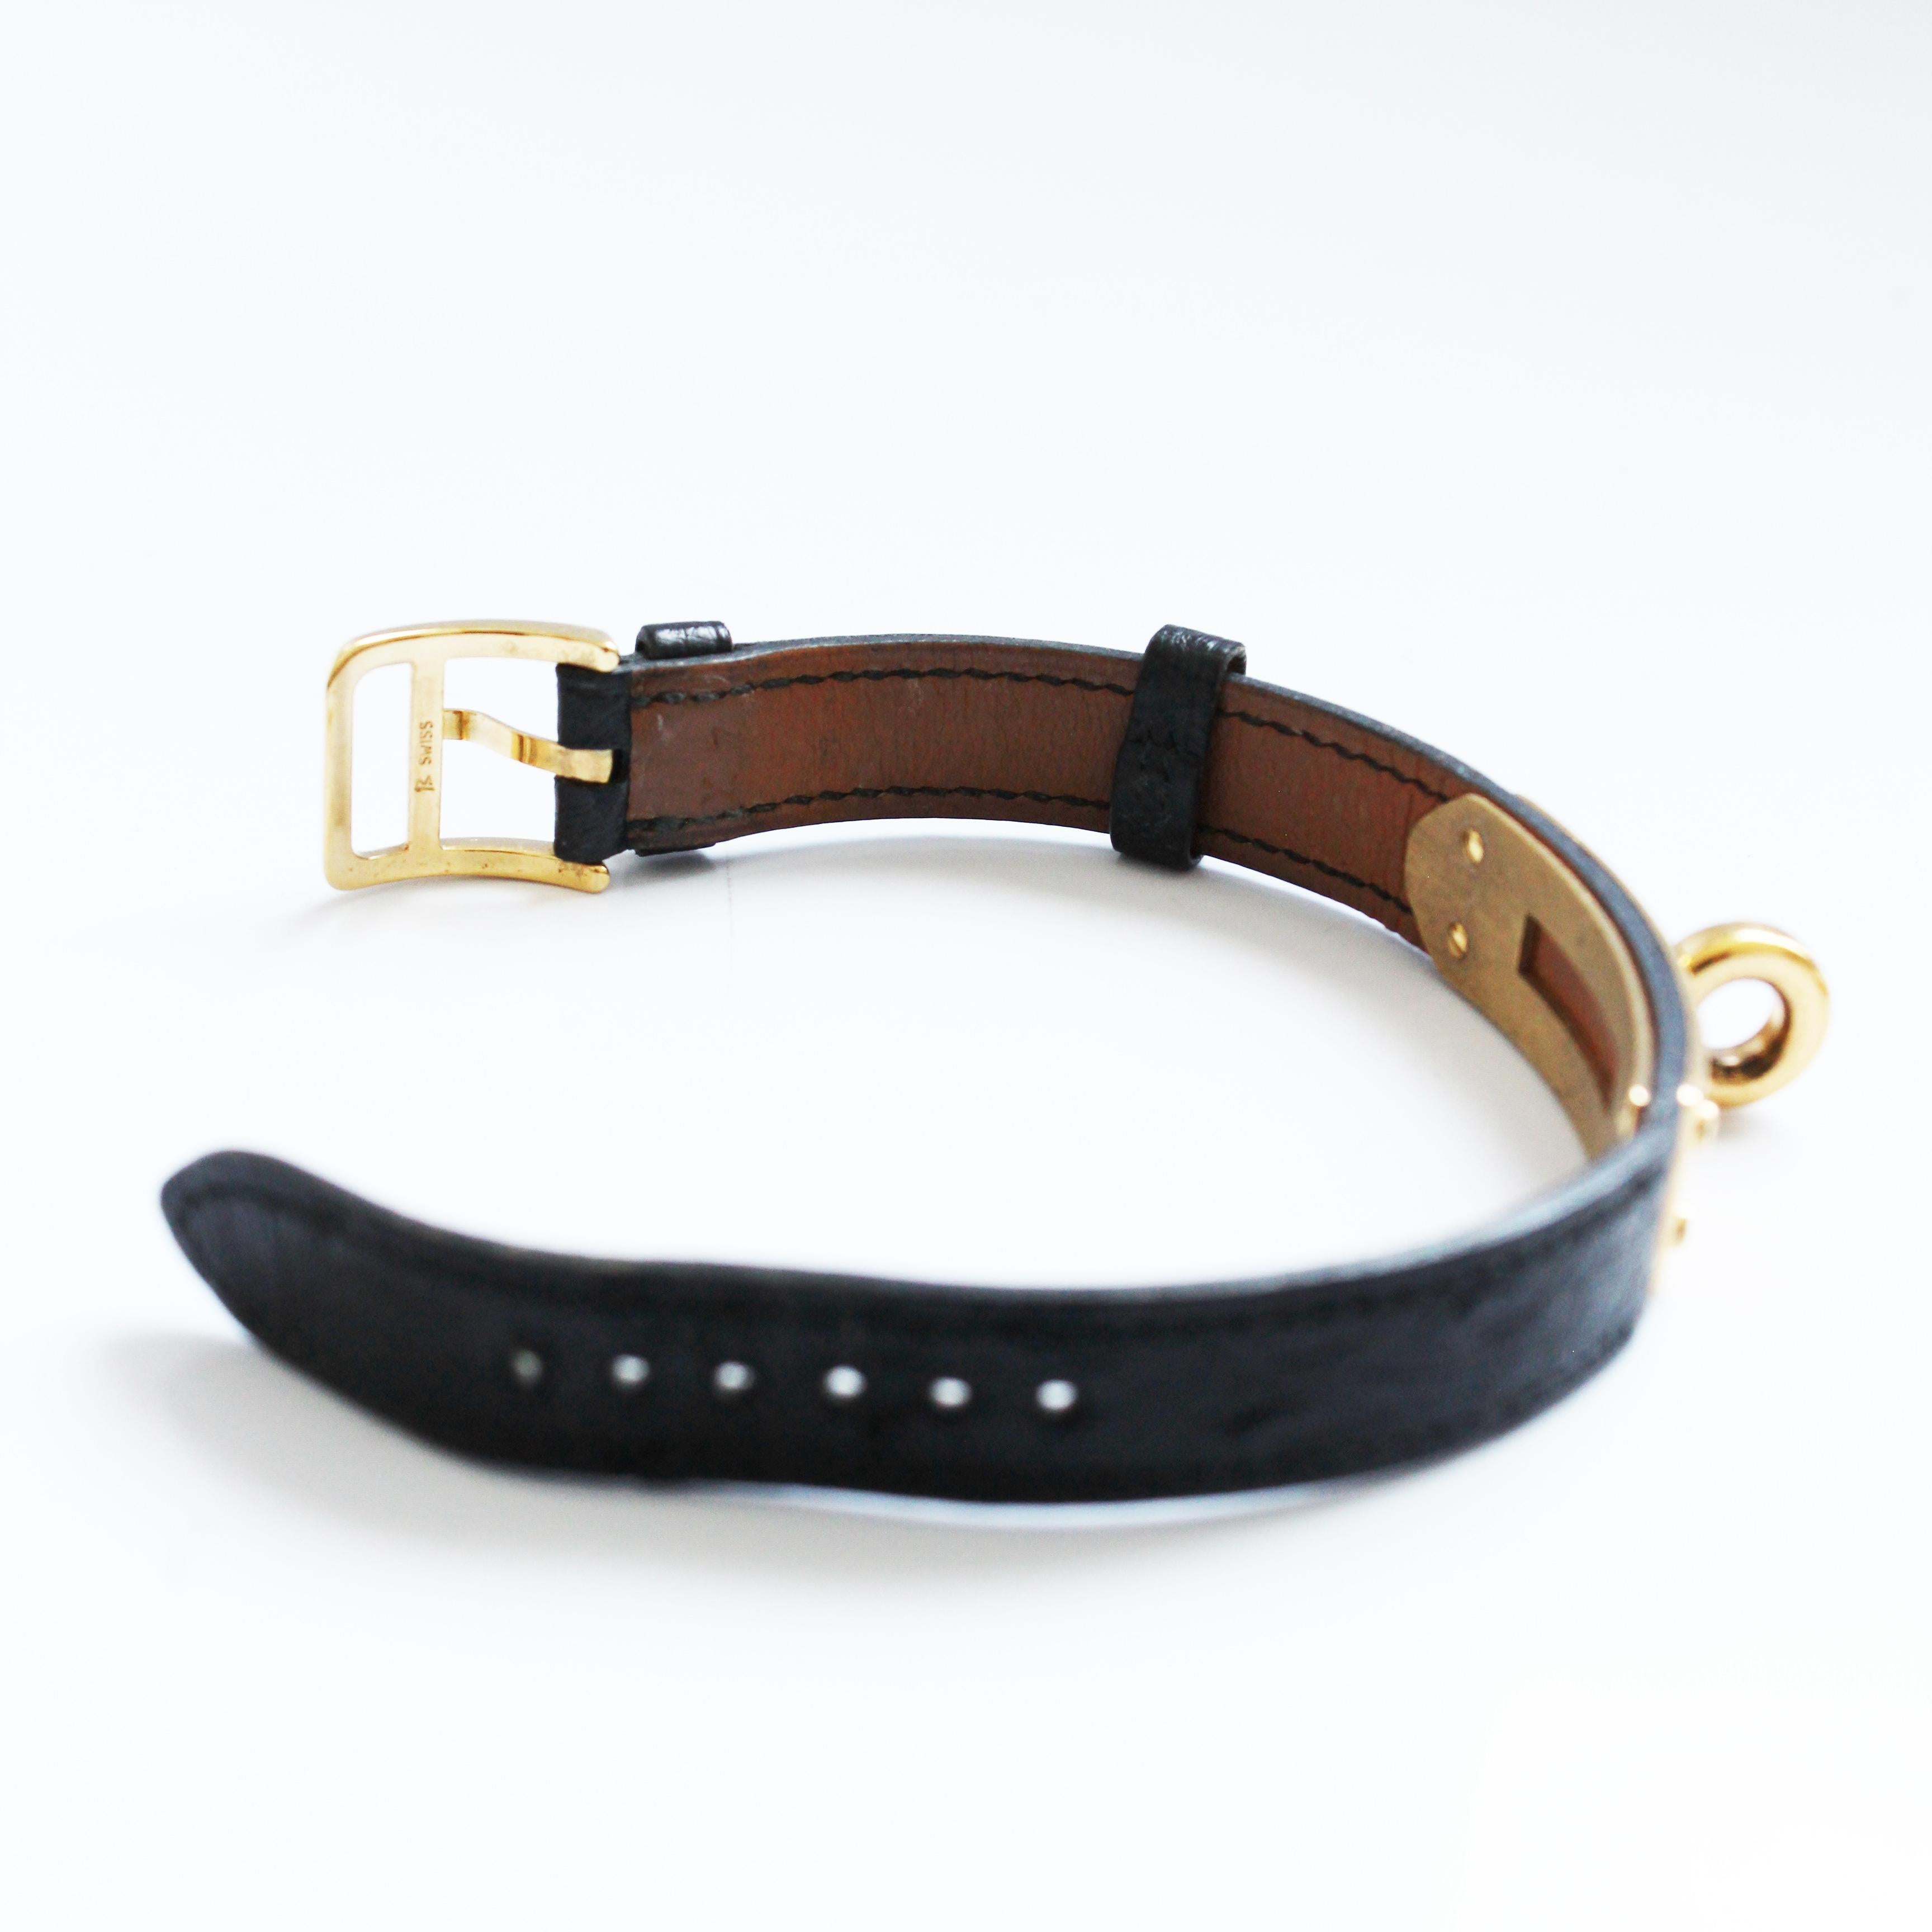 Contemporary Hermes Kelly Gold Cadena Lock Watch with Black Chèvre Mysore Leather Strap 1990s For Sale